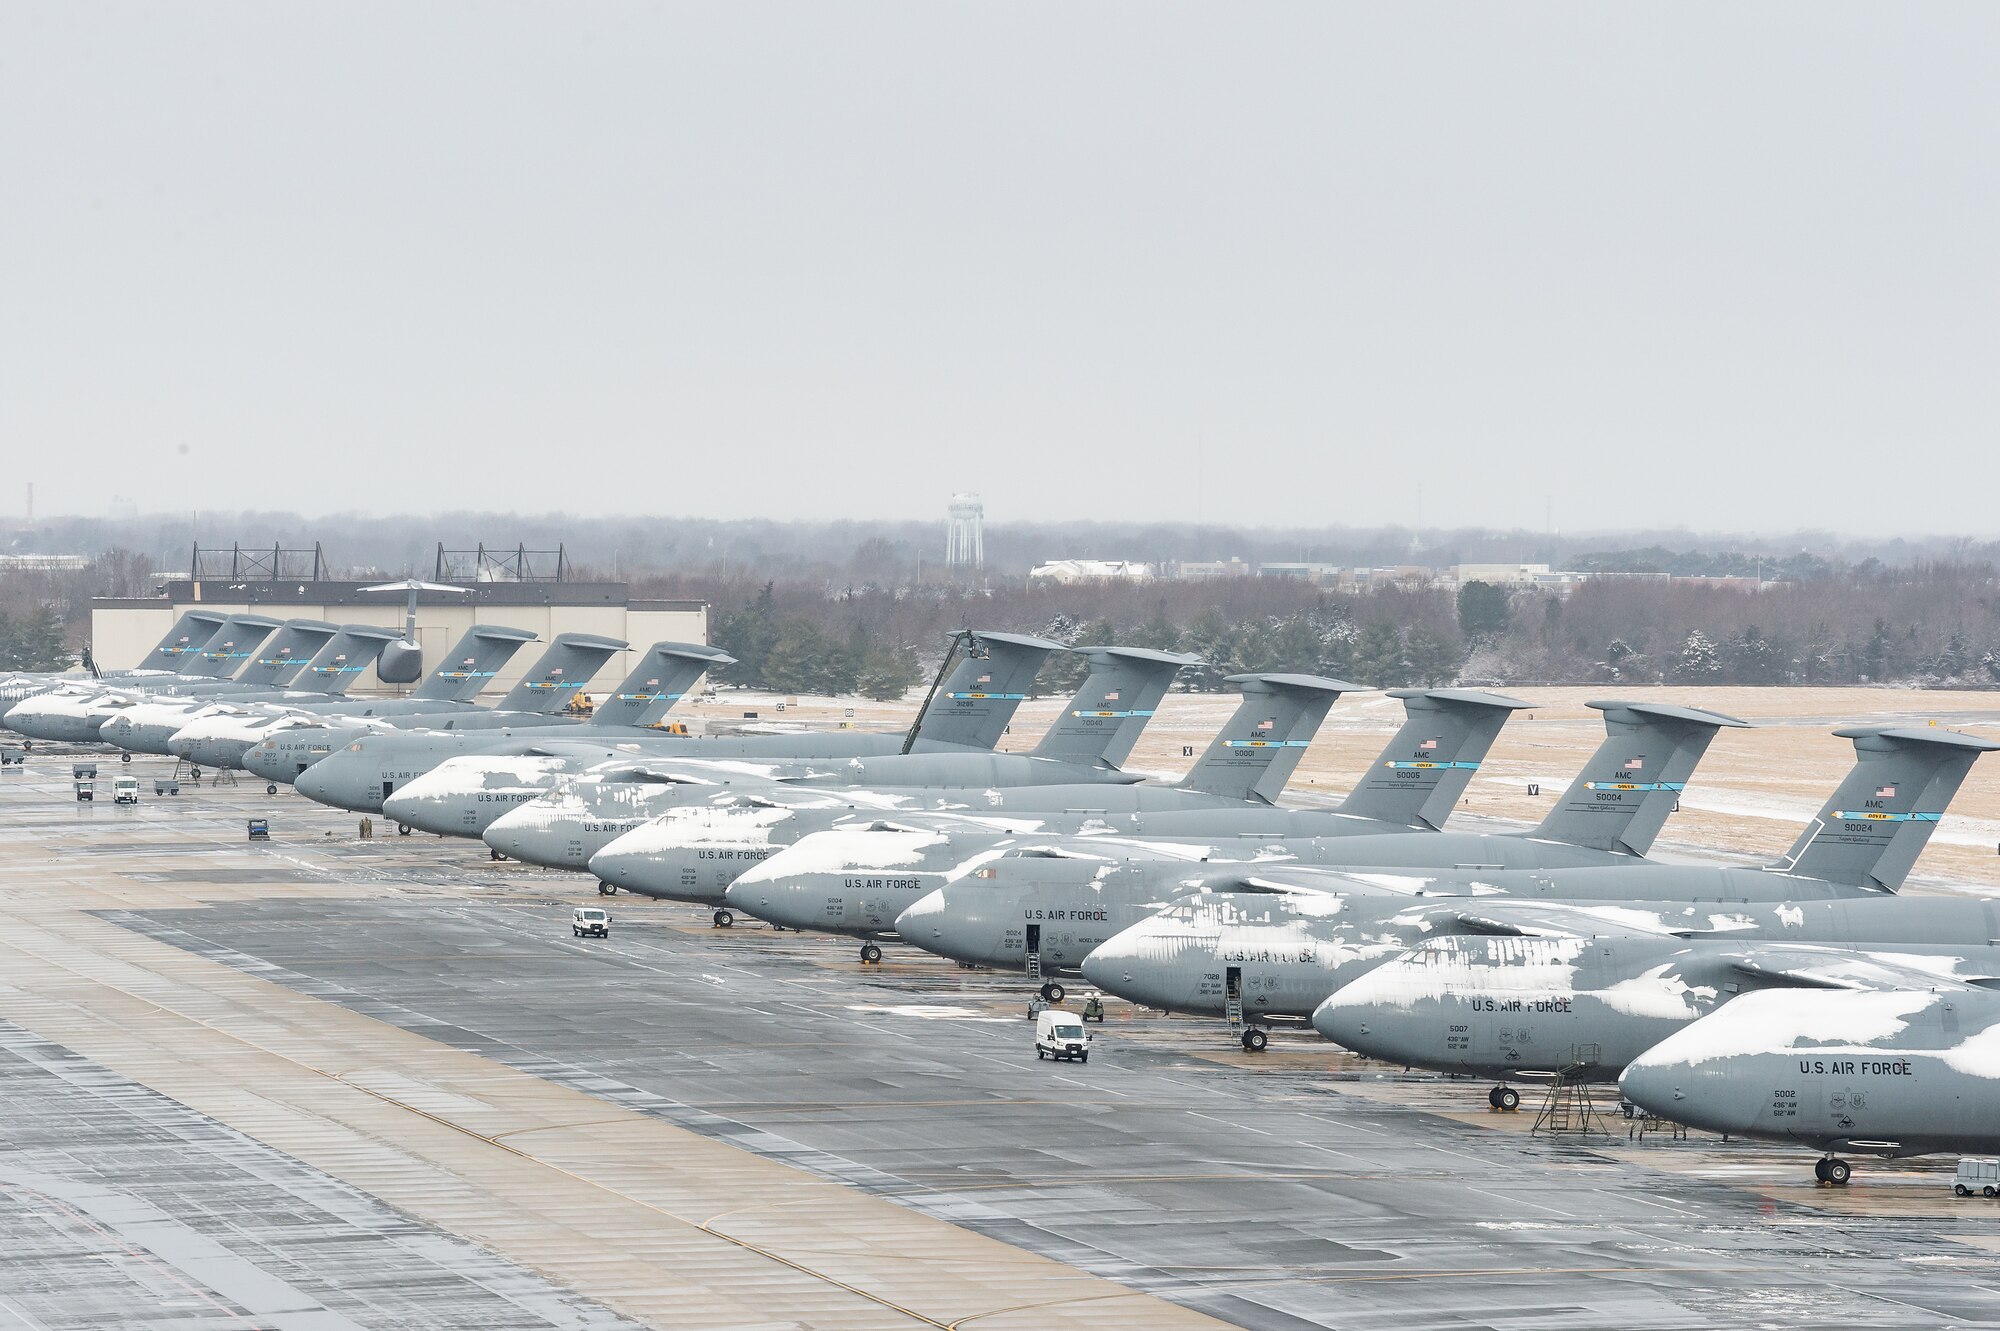 A view from the air traffic control tower of C-5M Super Galaxy and C-17 Globemaster III aircraft parked on the flight line after a nor’easter to produced snow showers at Dover Air Force Base, Delaware, Feb. 2, 2021. As snow fell, the base continued normal operations and prepared for additional forecast snowfall during the next day. (U.S. Air Force photo by Roland Balik)